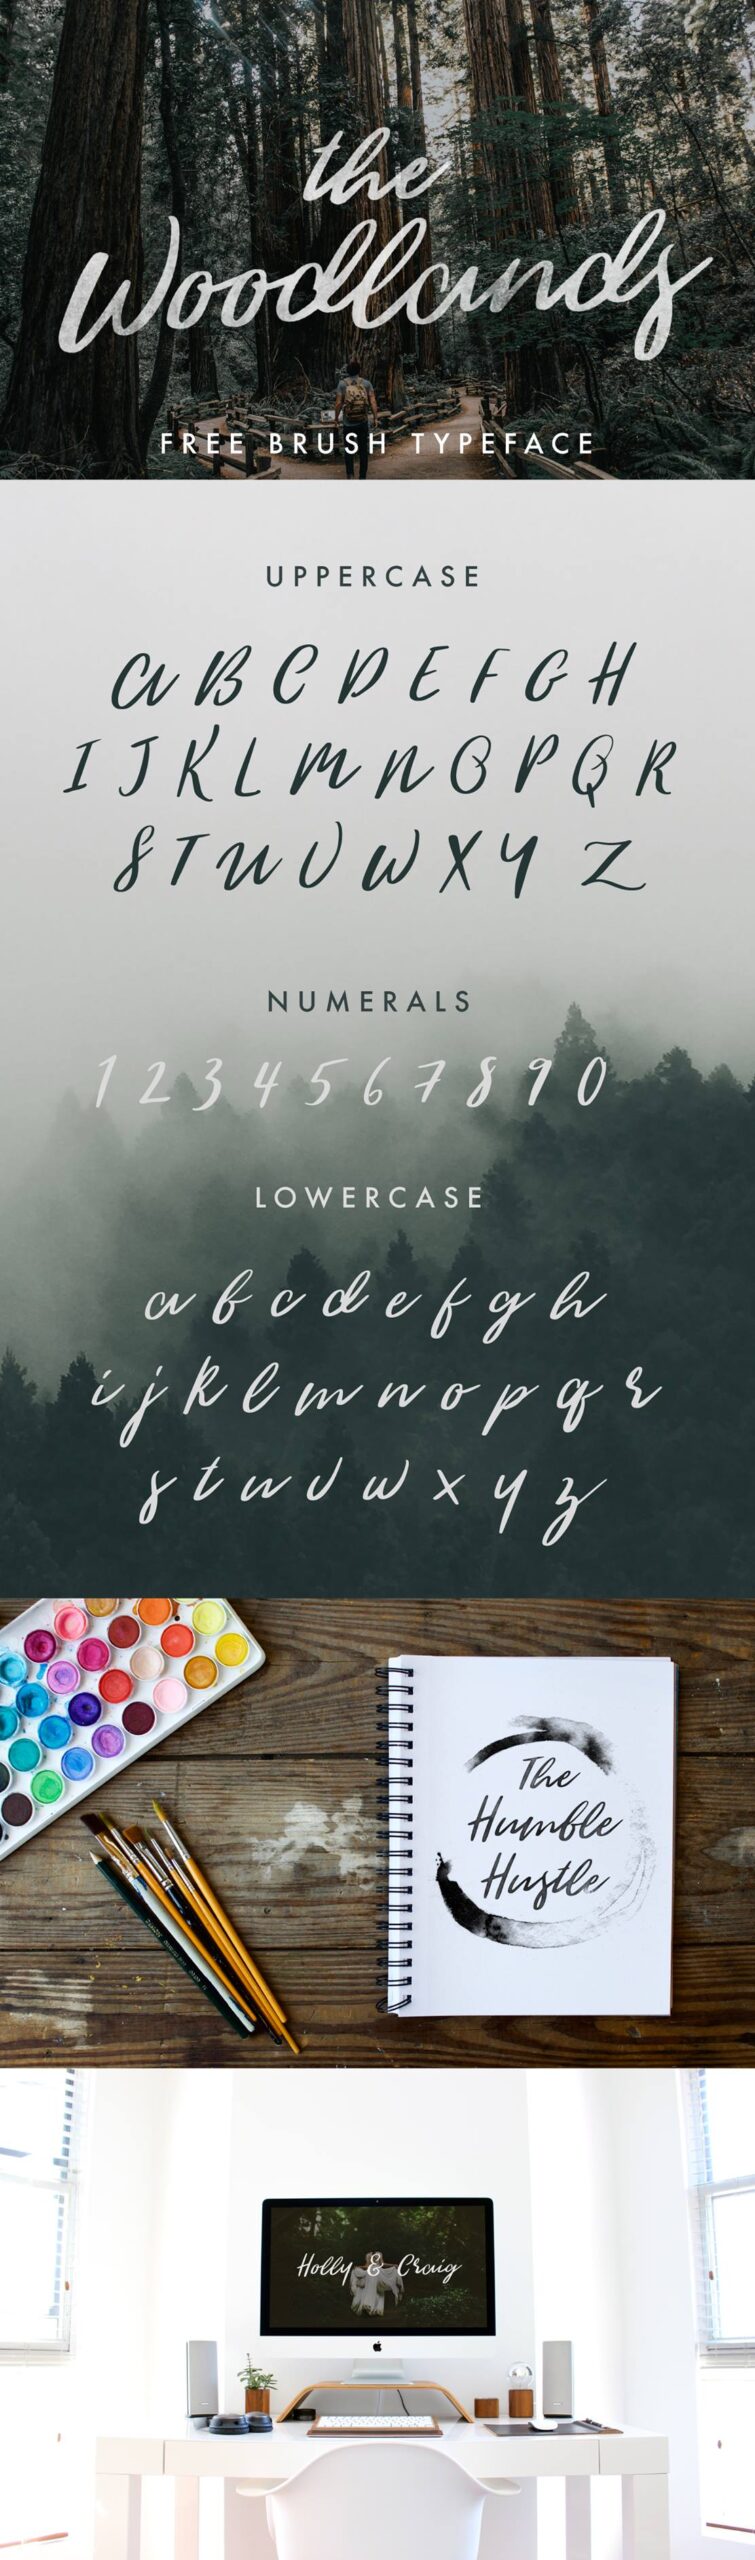 The Woodlands Font Free